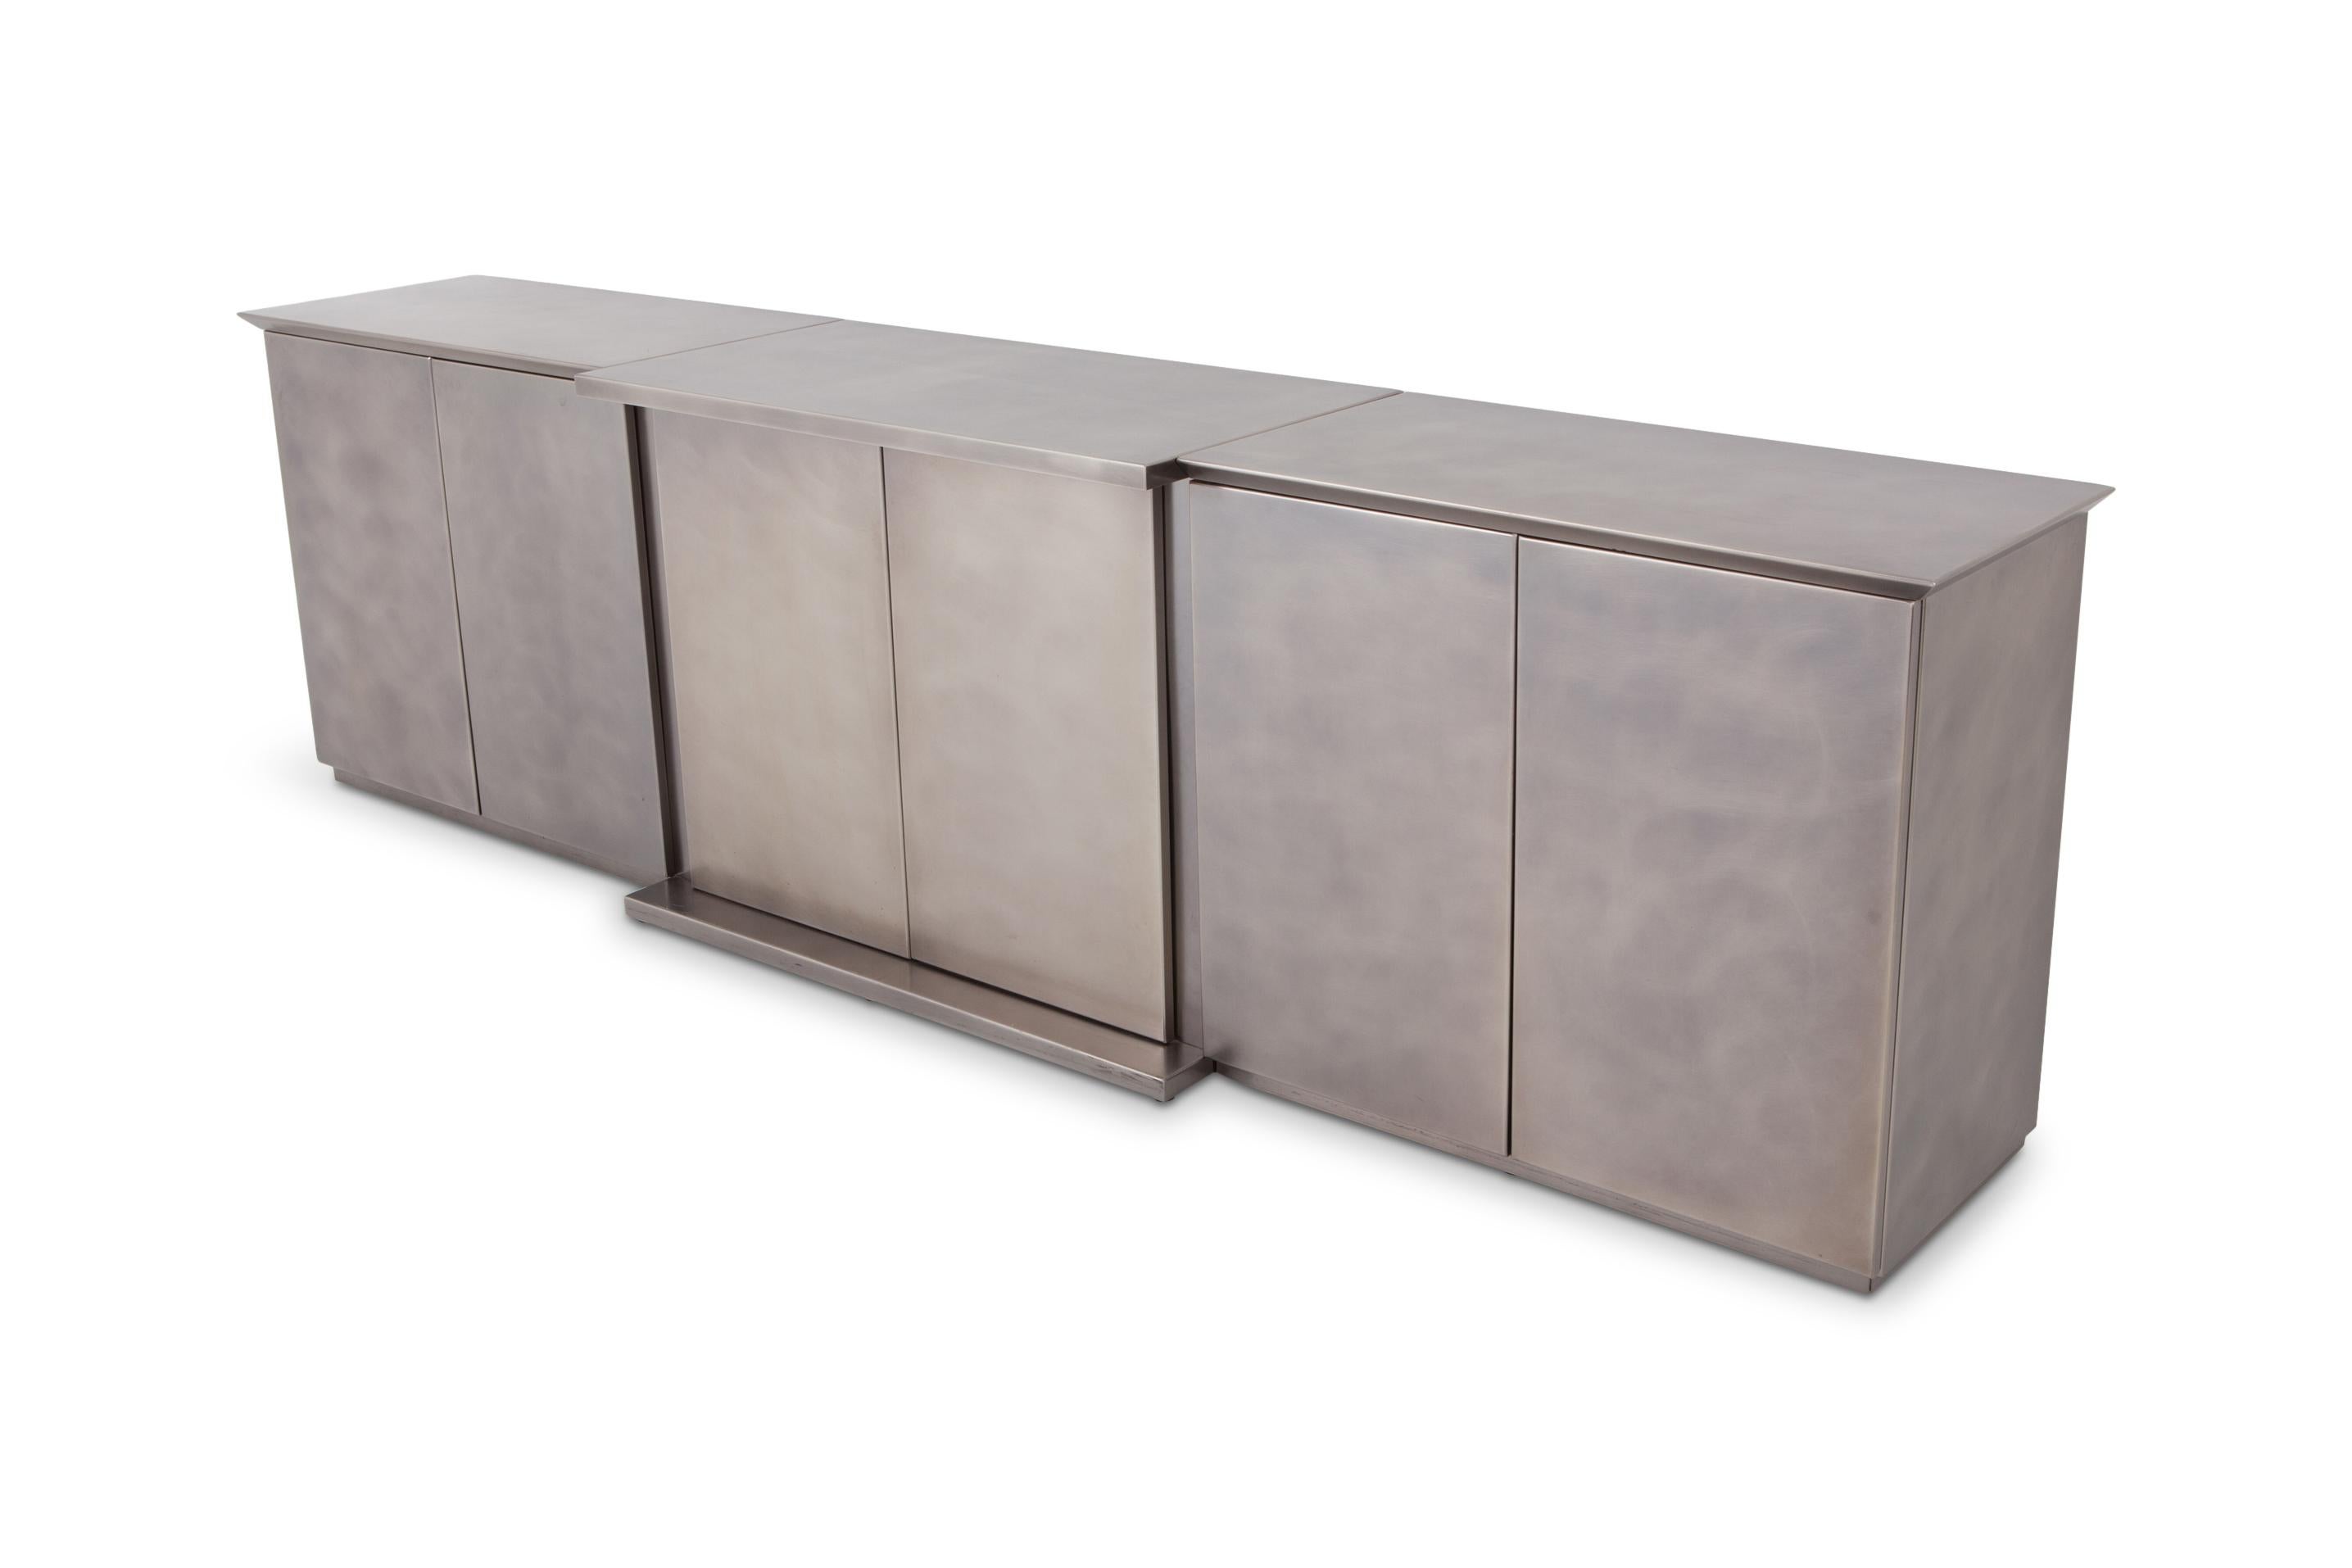 Postmodern metallic brushed stainless steel sideboard produced by Belgo Chrome, 1980s

The piece consists out of three elements with two large doors panels, creating loads of storage space.

Steel in mint condition.